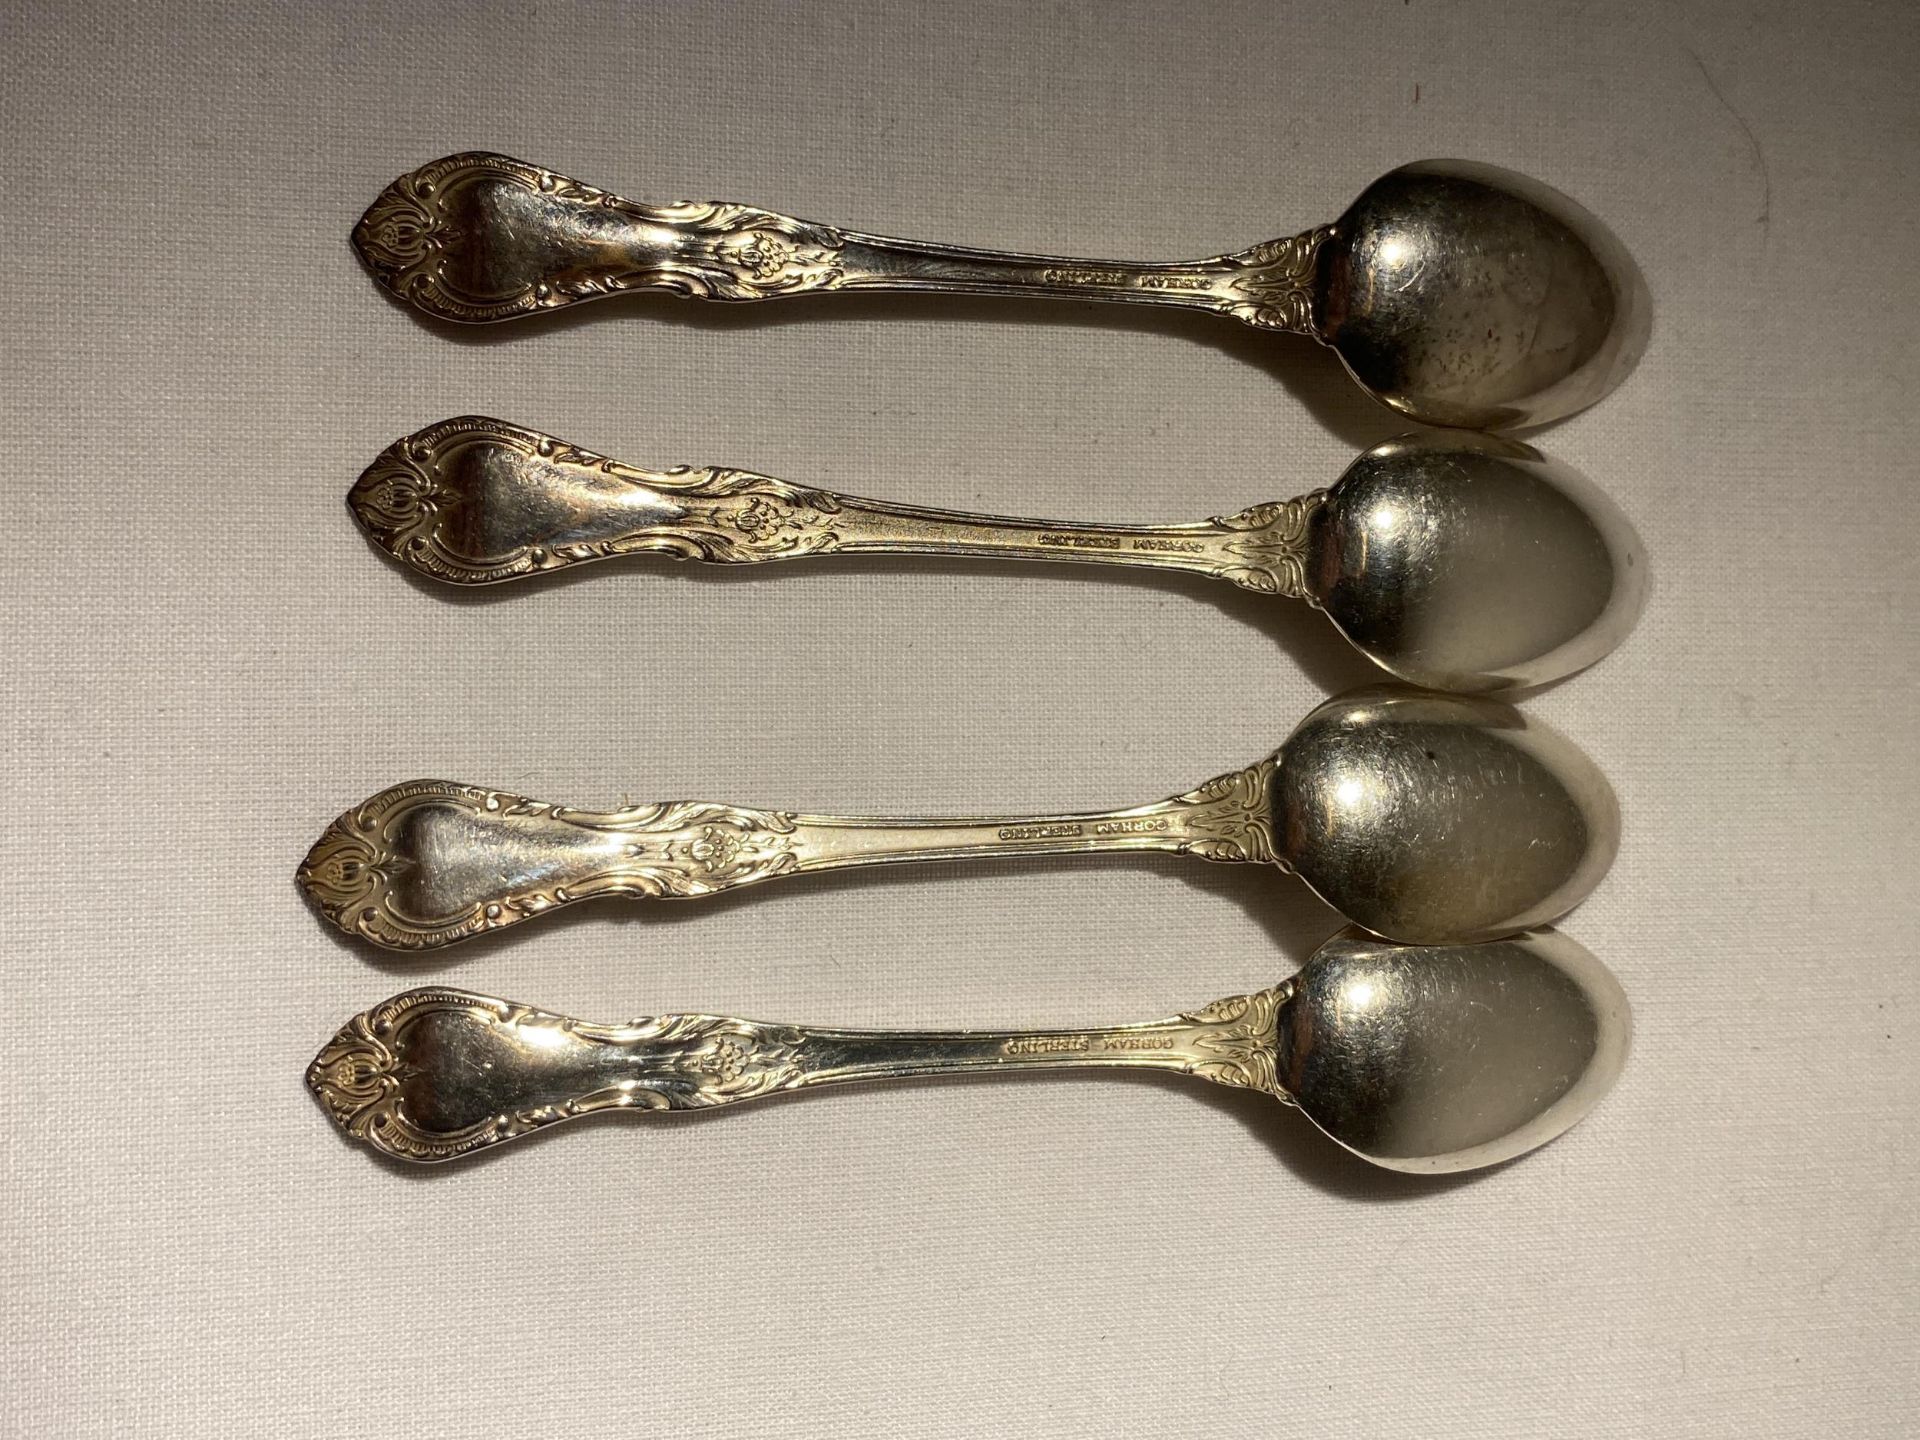 A SET OF AMERICAN GORHAM STERLING SILVER TEASPOONS, GROSS WEIGHT 46 GRAMS - Image 10 of 21